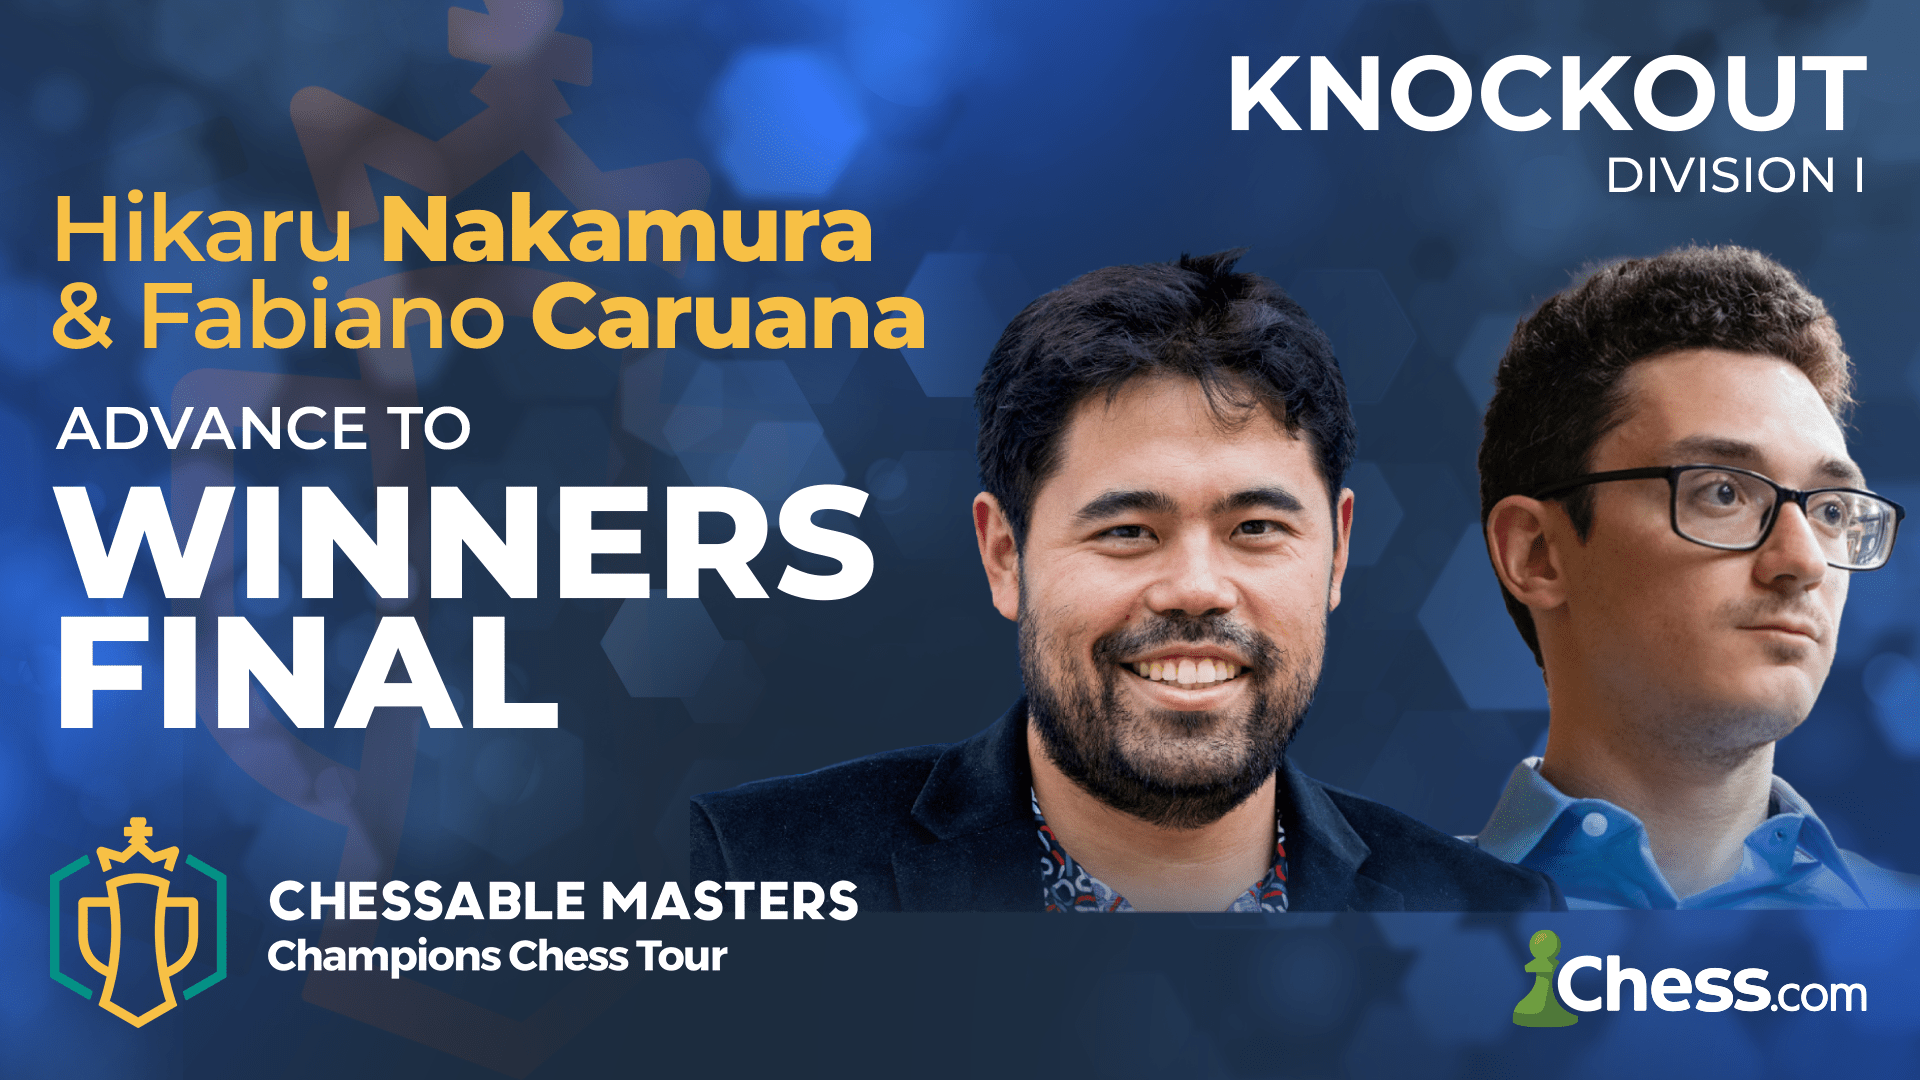 Champions Chess Tour: Chessable Masters, Day 1